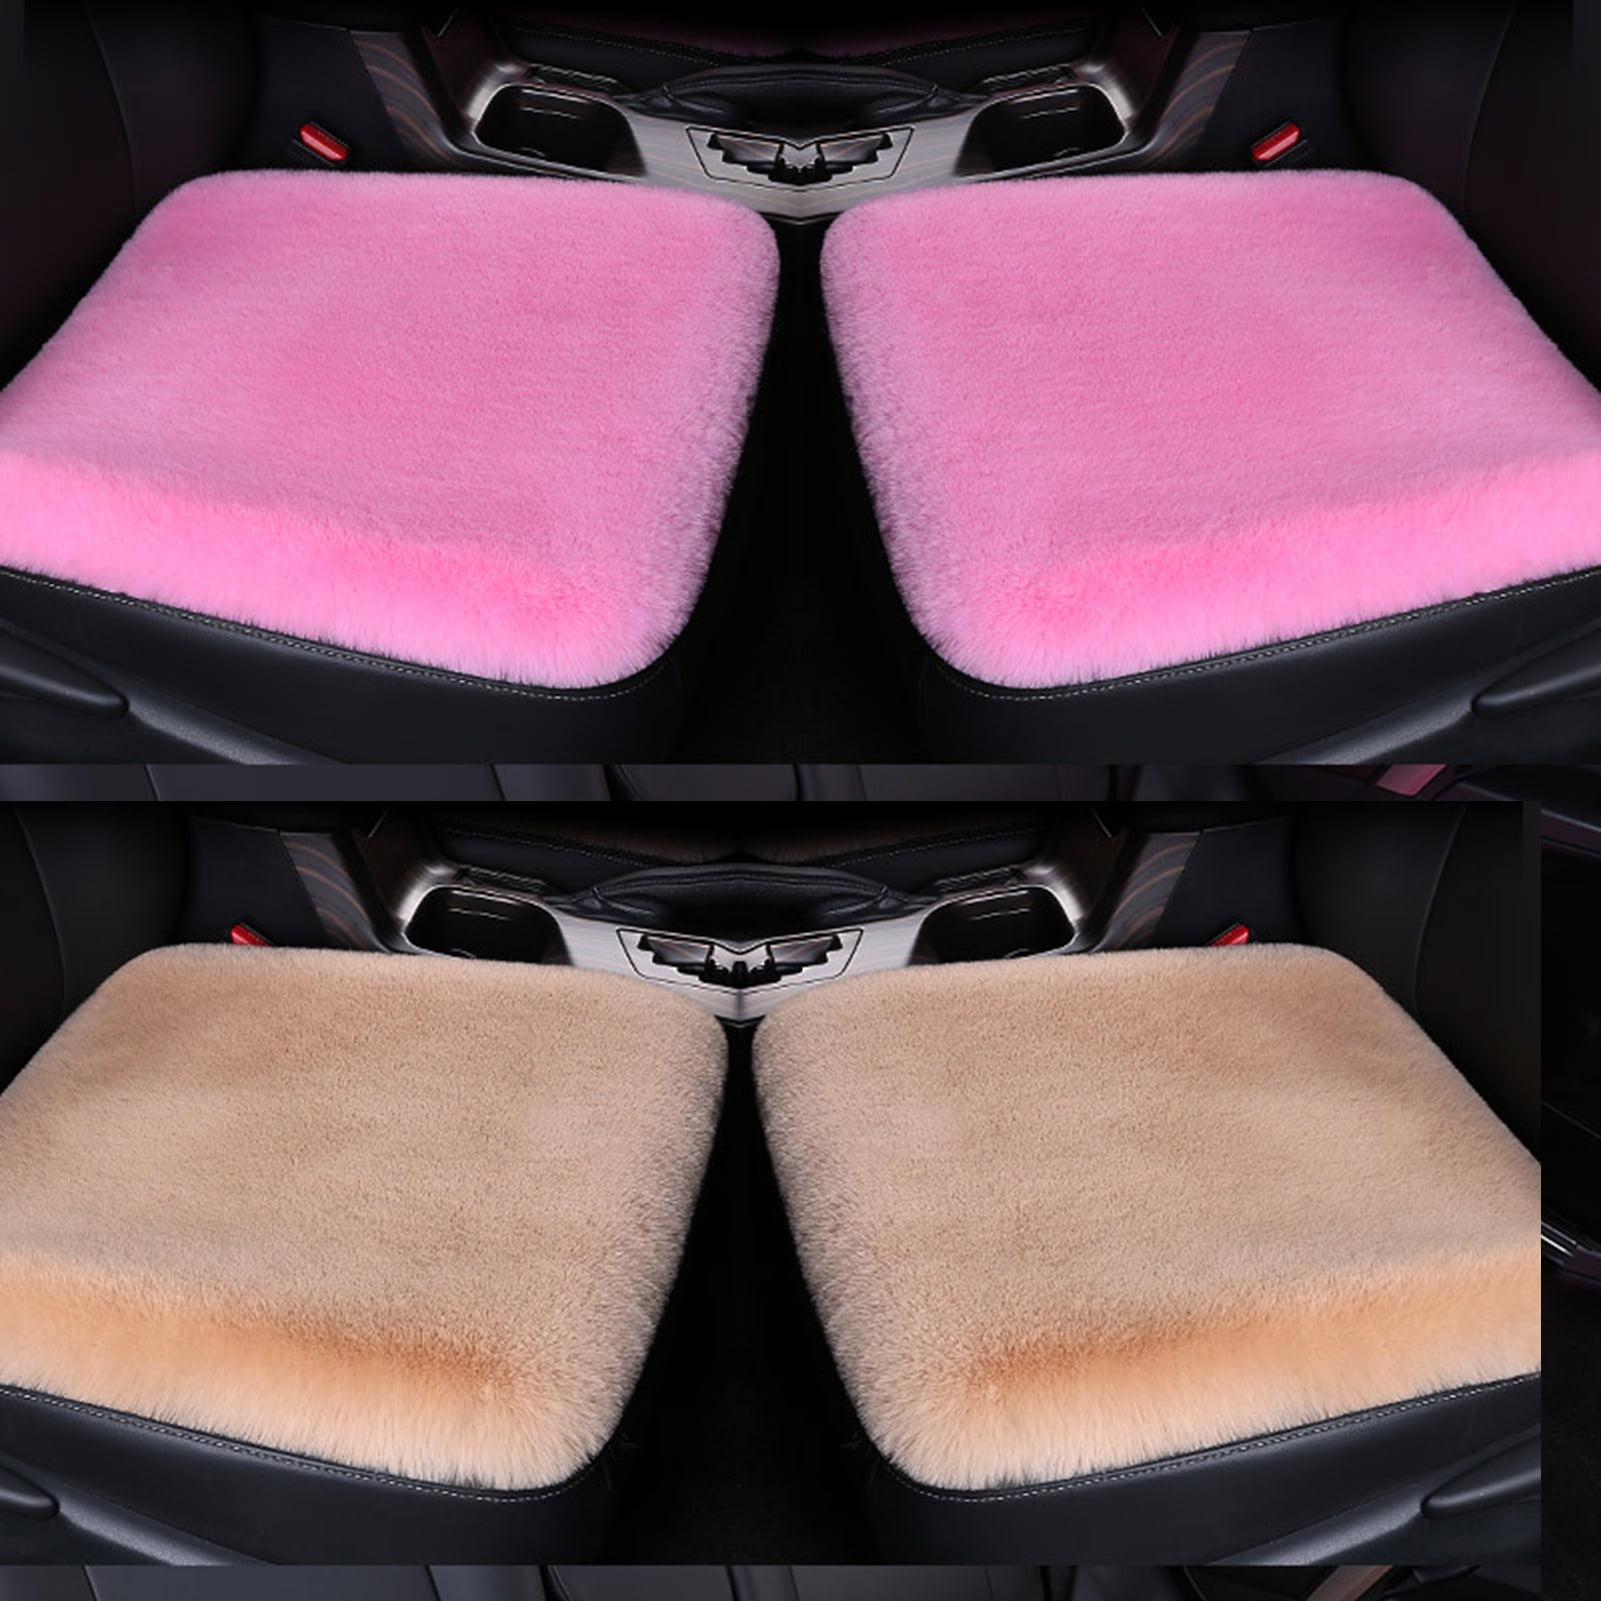 Luxury Warm Plush Car Non-Slip Seat Cover,Universal Fit Auto Front & Back  Seat Pad,Soft Plush Large Plaid Square Winter Cushion for Most